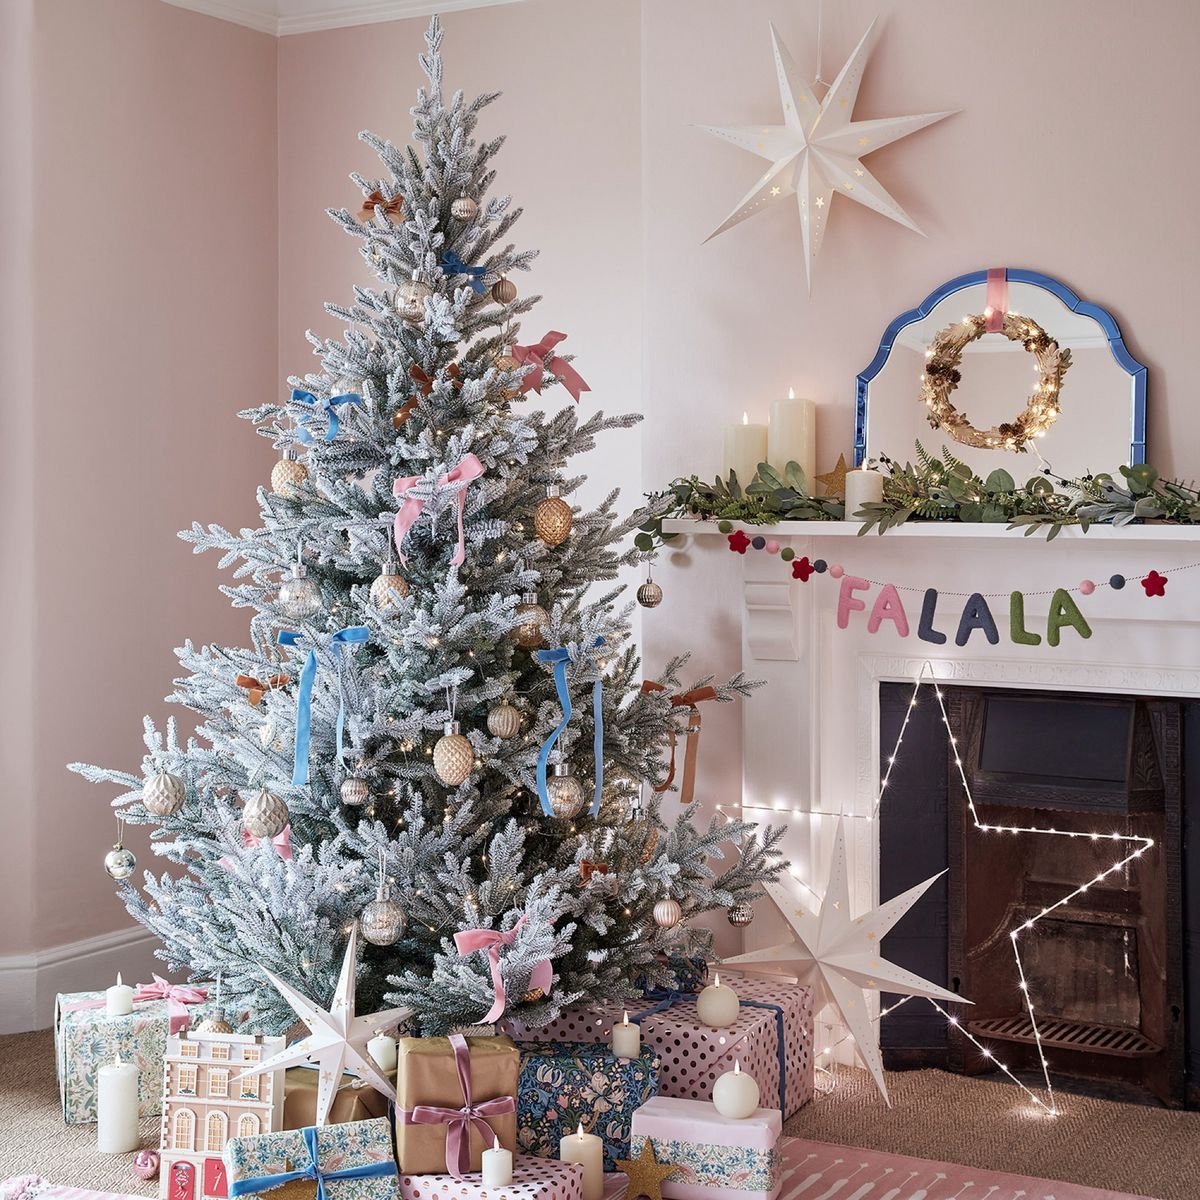 10 Christmas tree ribbon ideas – try the hottest festive decorating trend this year